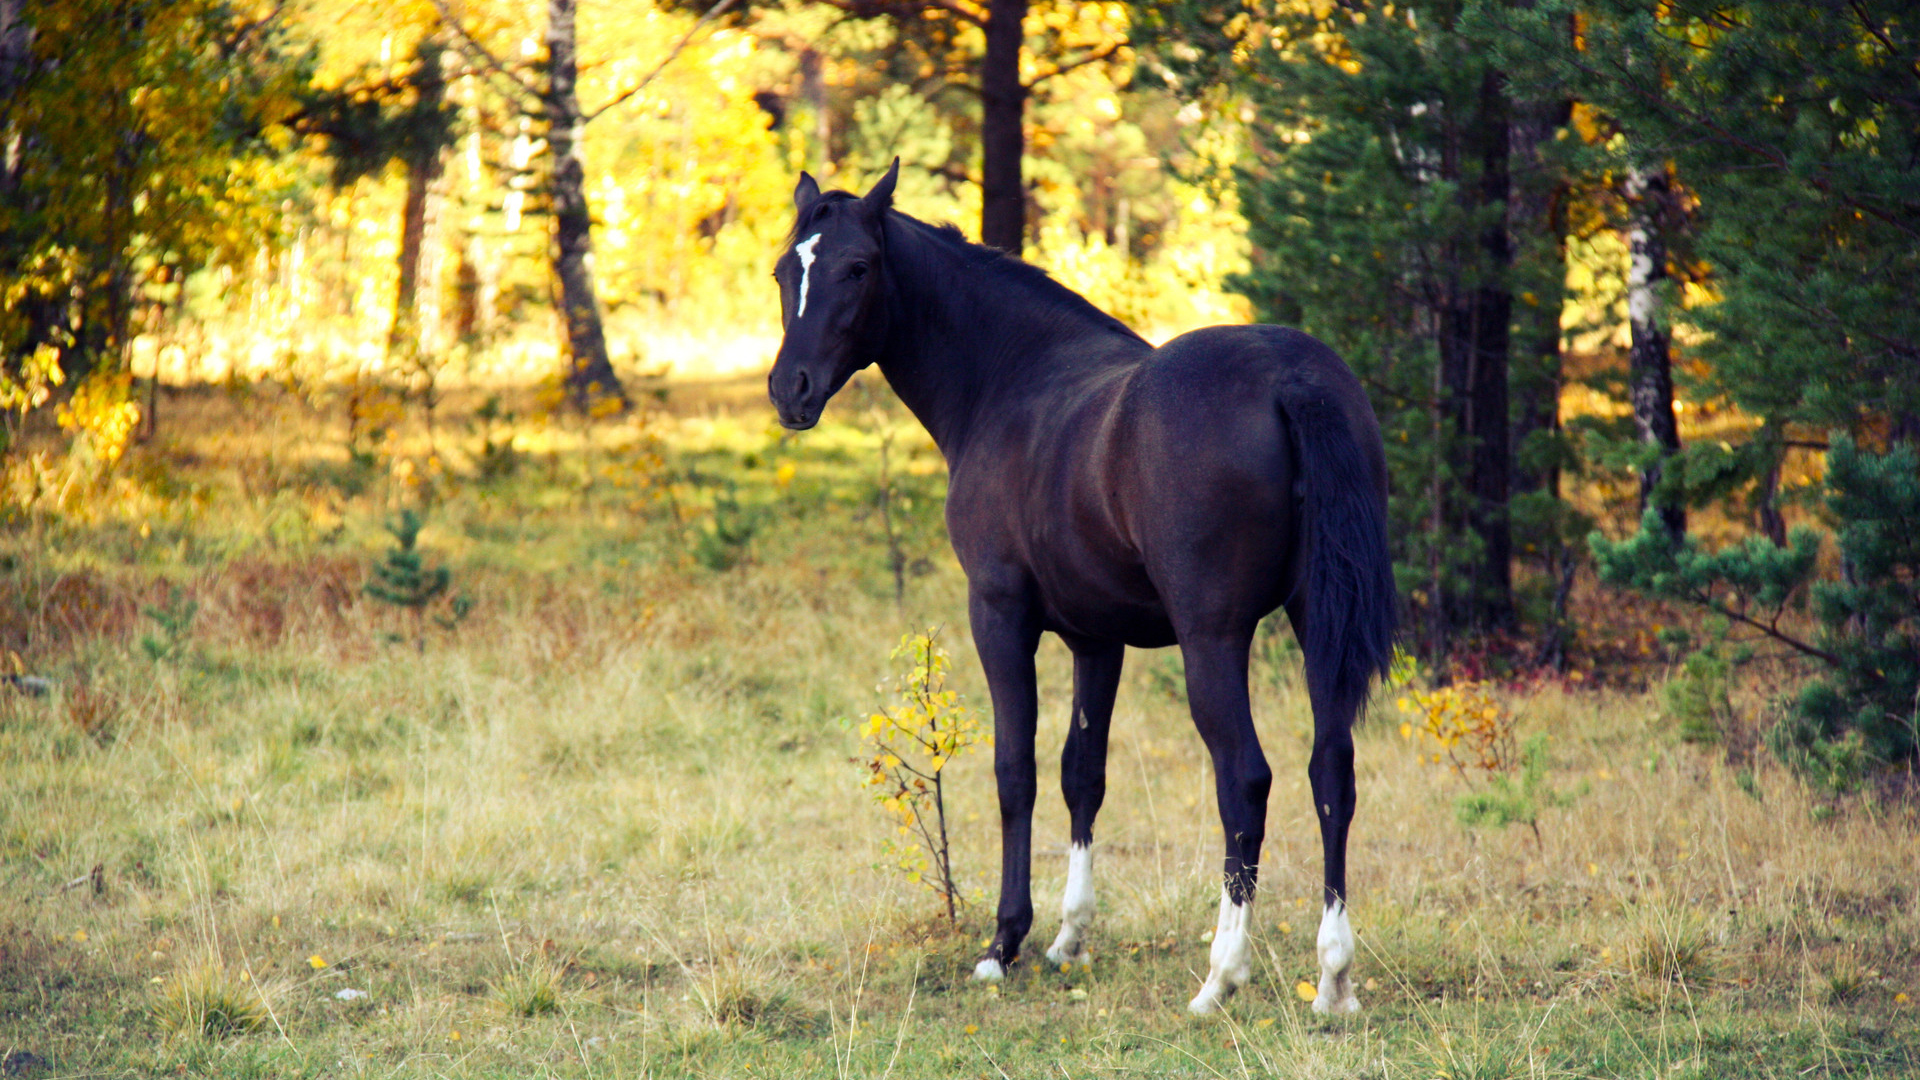 Black Horse With Wallpaper Of Trees 2K Horse